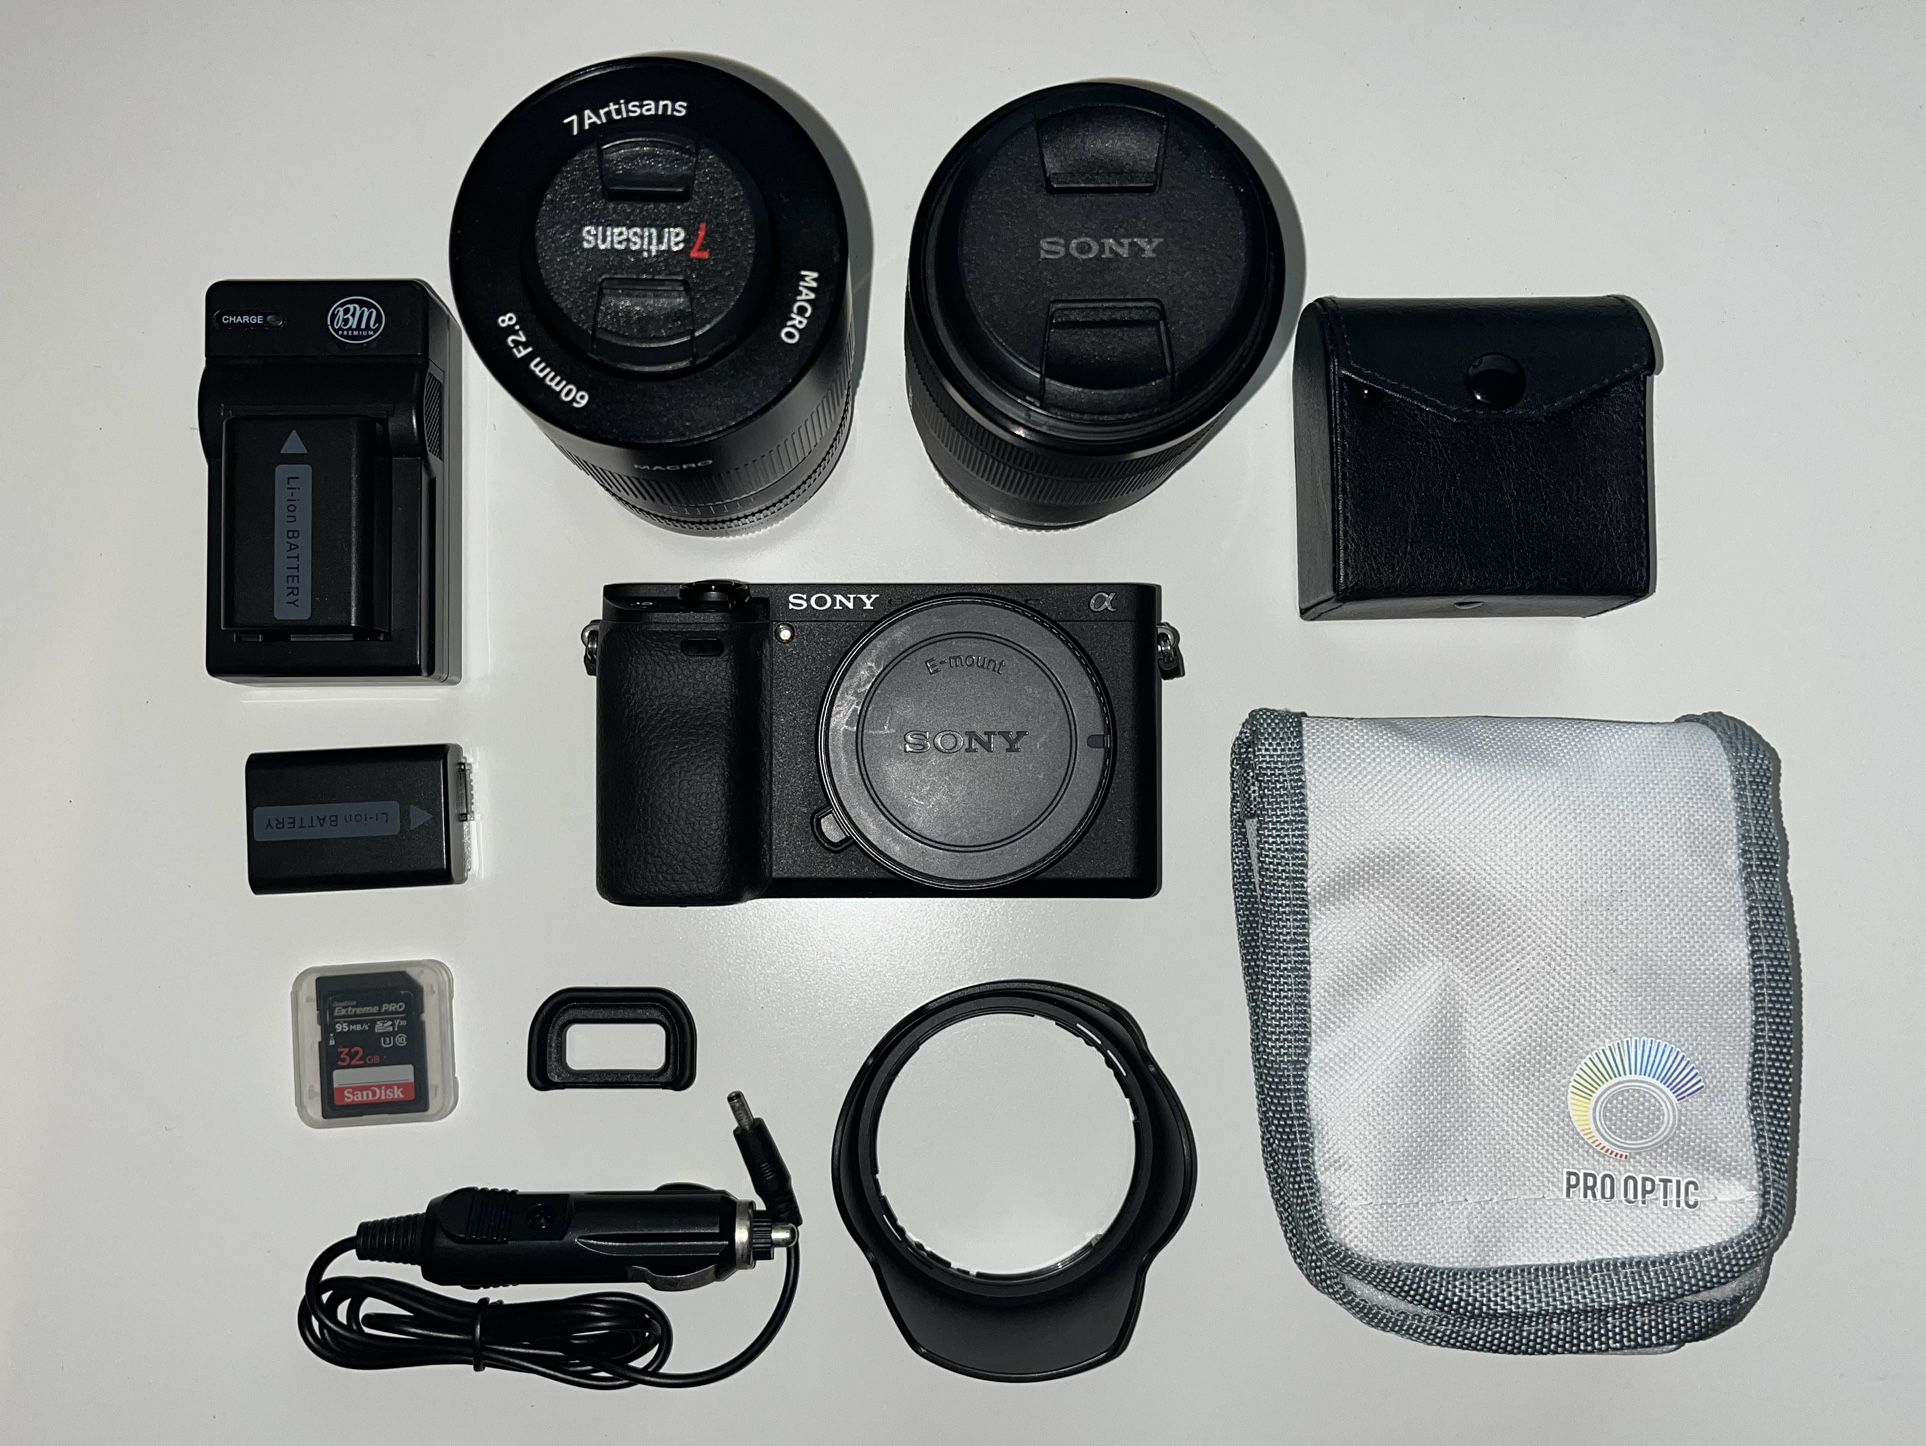 Sony a6400 Mirrorless Camera with 18-135mm Lens, 60mm f/2.8 Macro Lens, and Accessories Kit